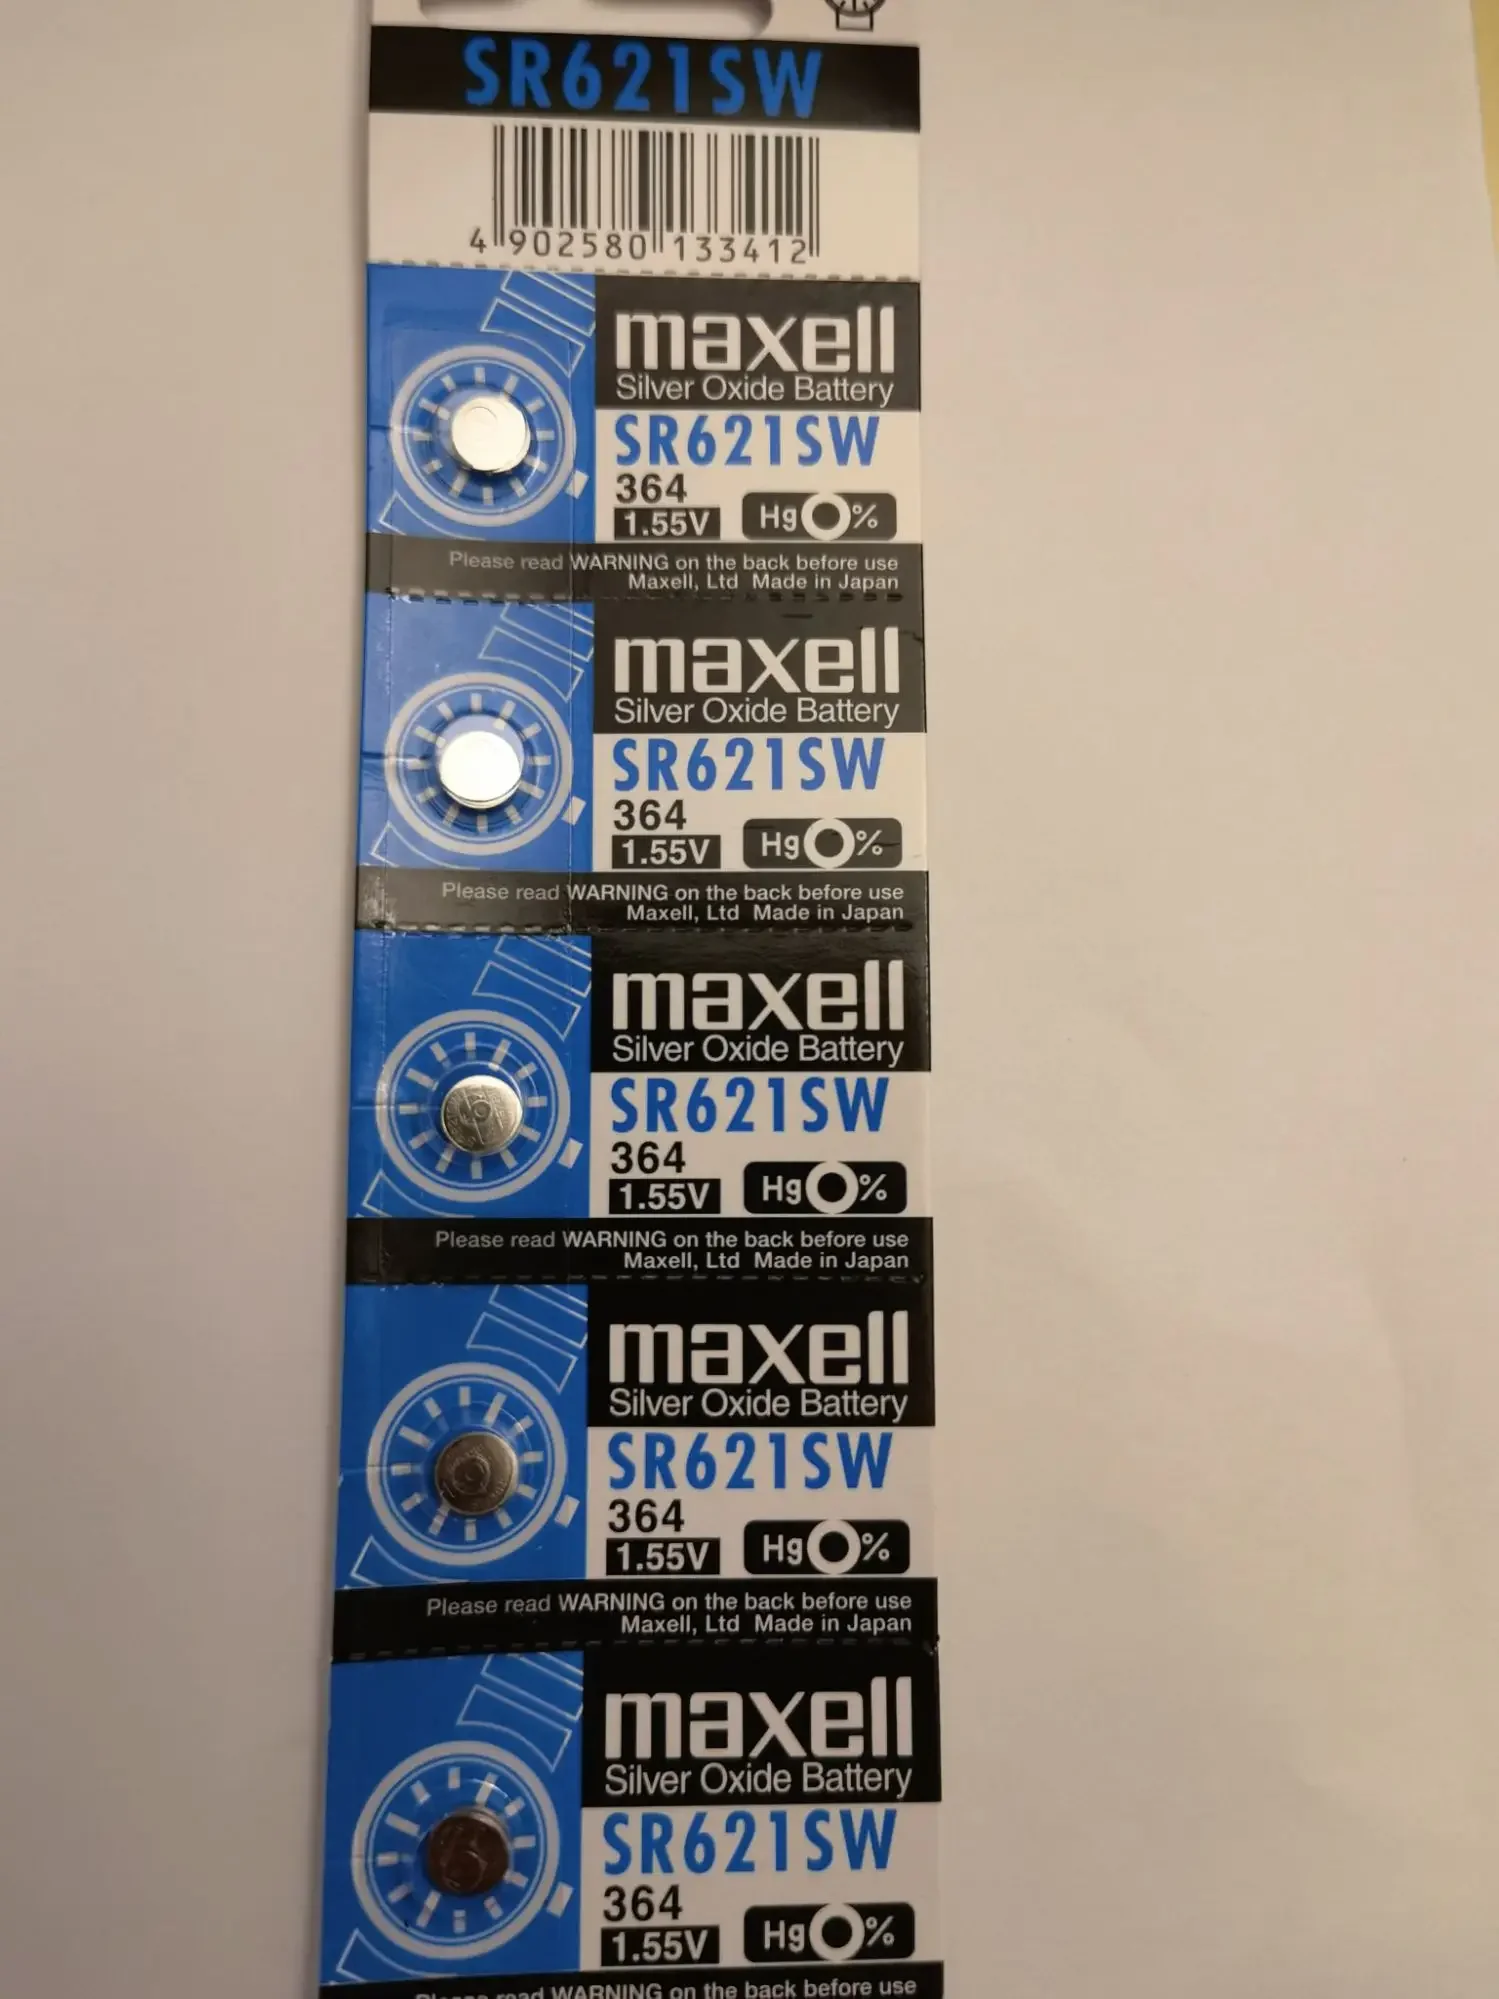 Ready Stock Maxell SR621SW (364) 1.55V Silver Oxide Battery - A Pack of 5 Pieces Exp Date 12/2025 made in JAPAN